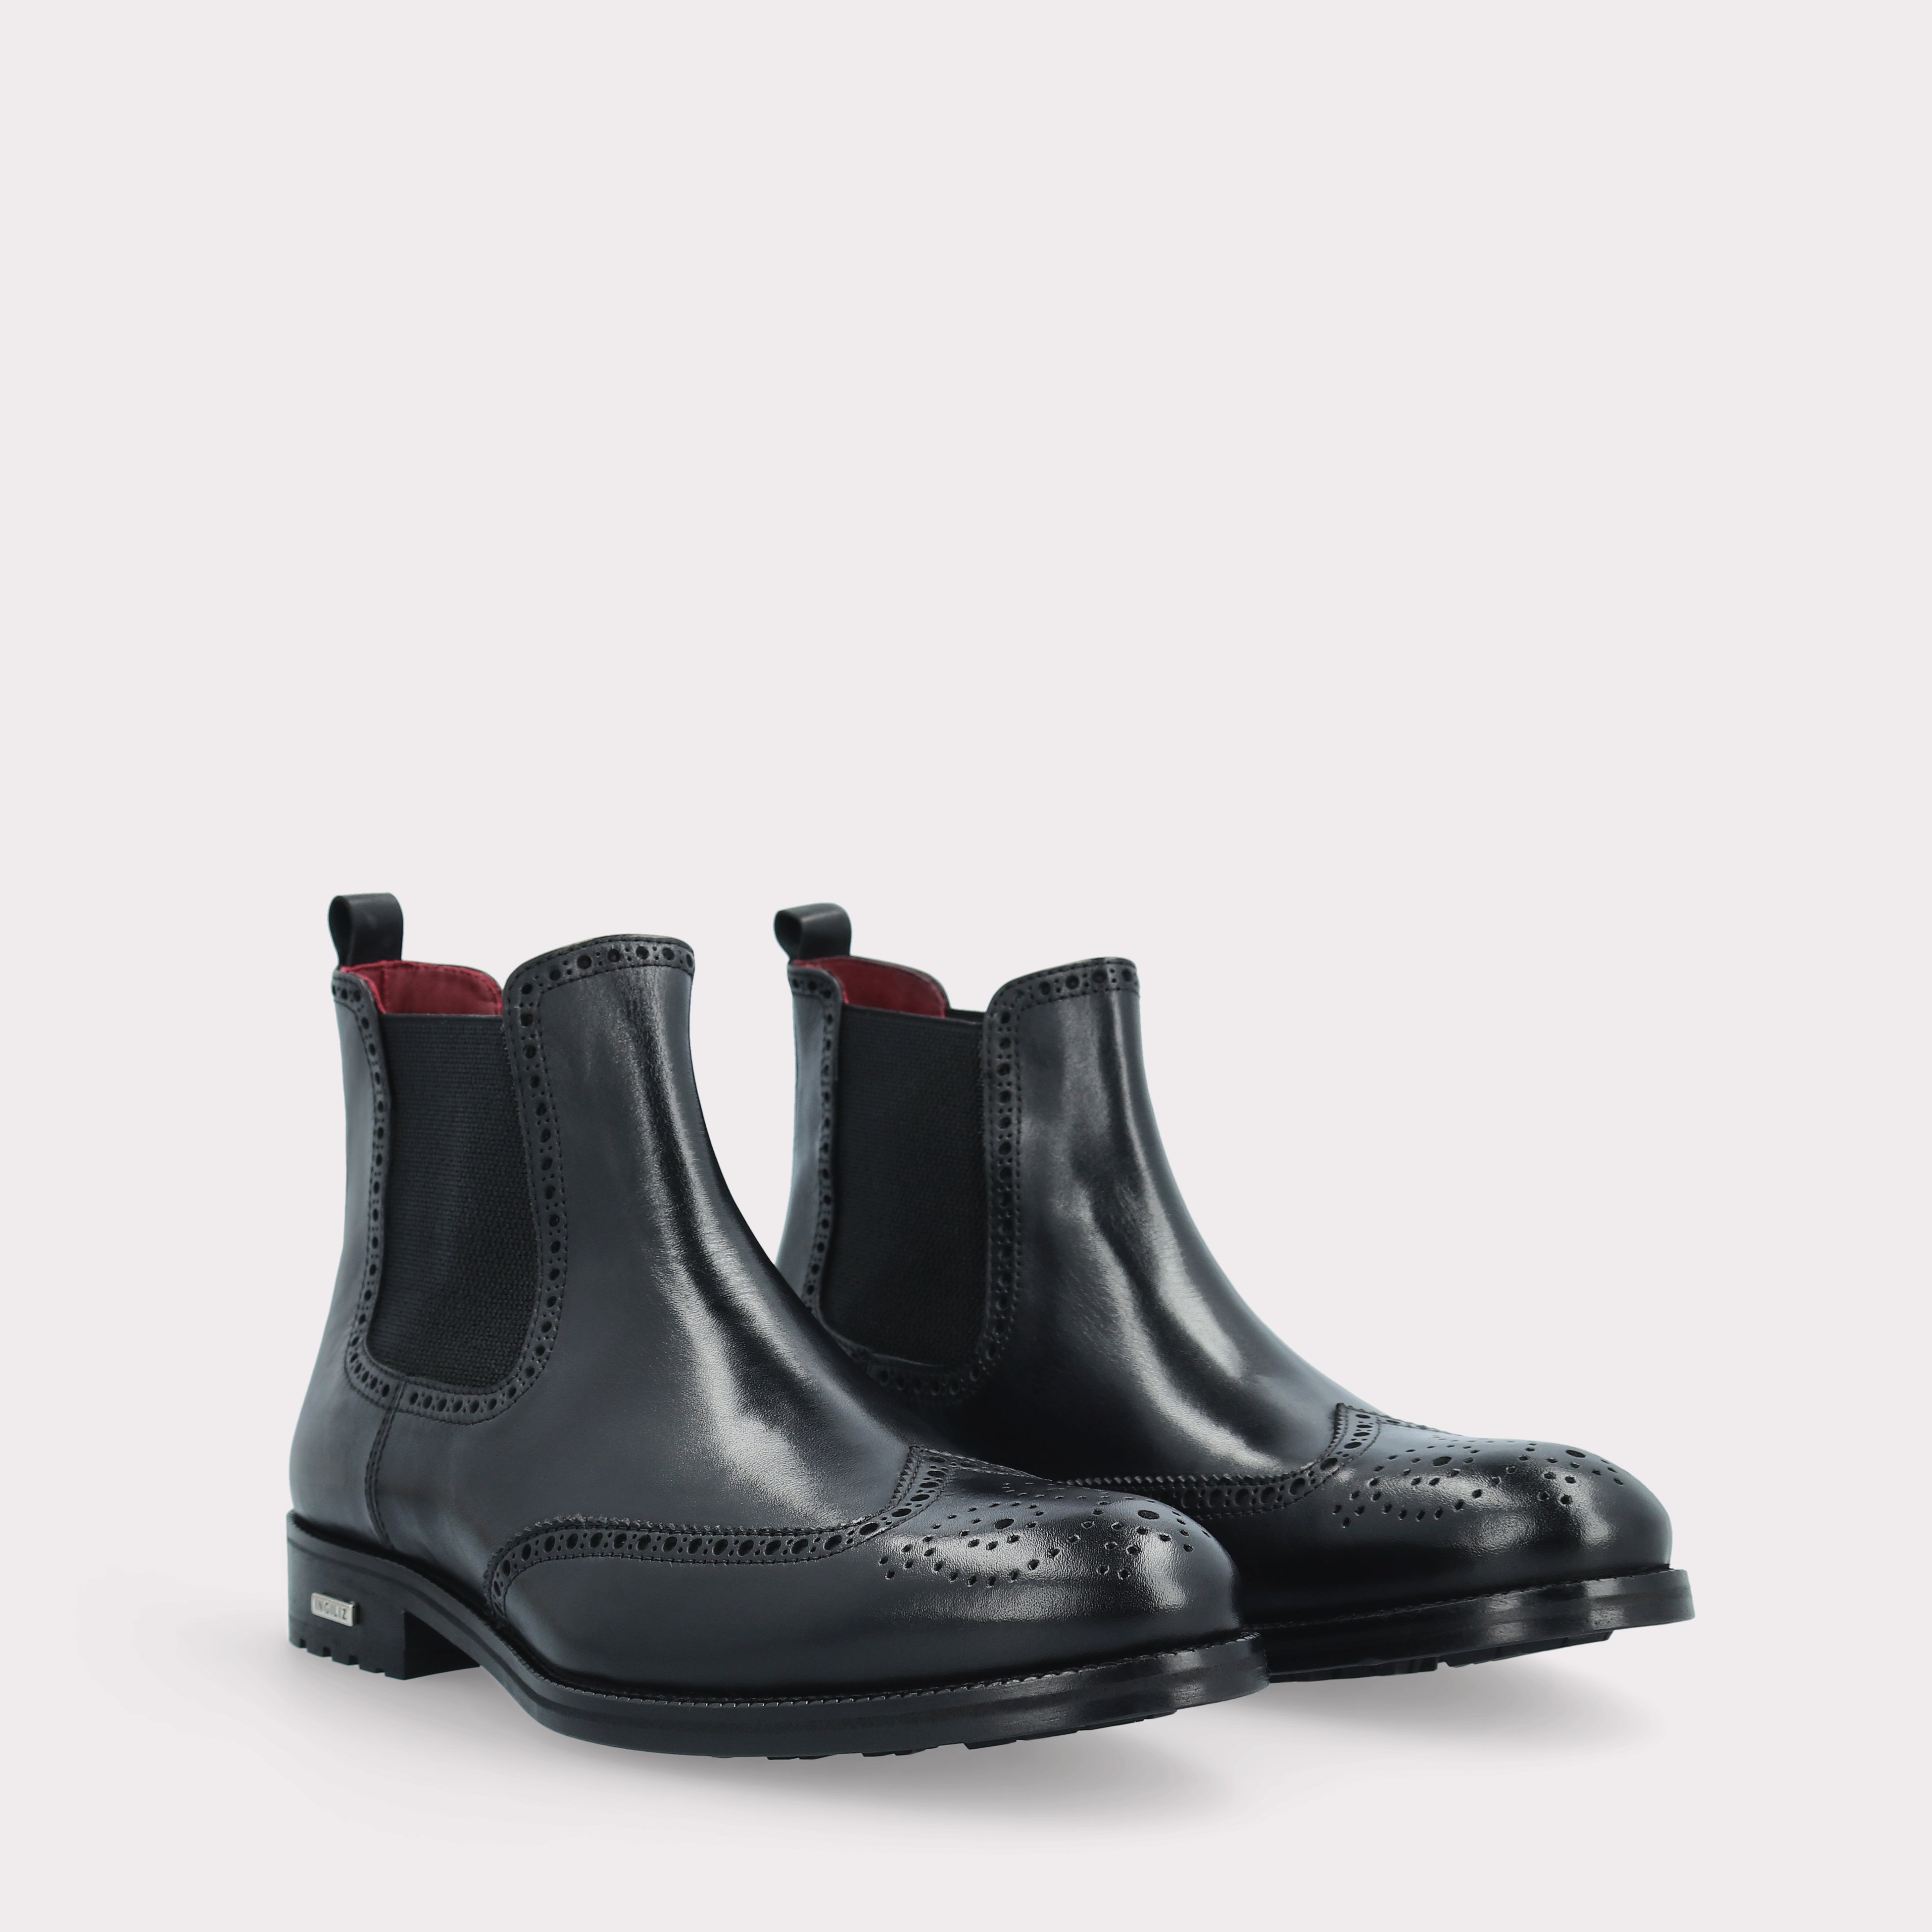 MODENA 01 black leather chelsea boots